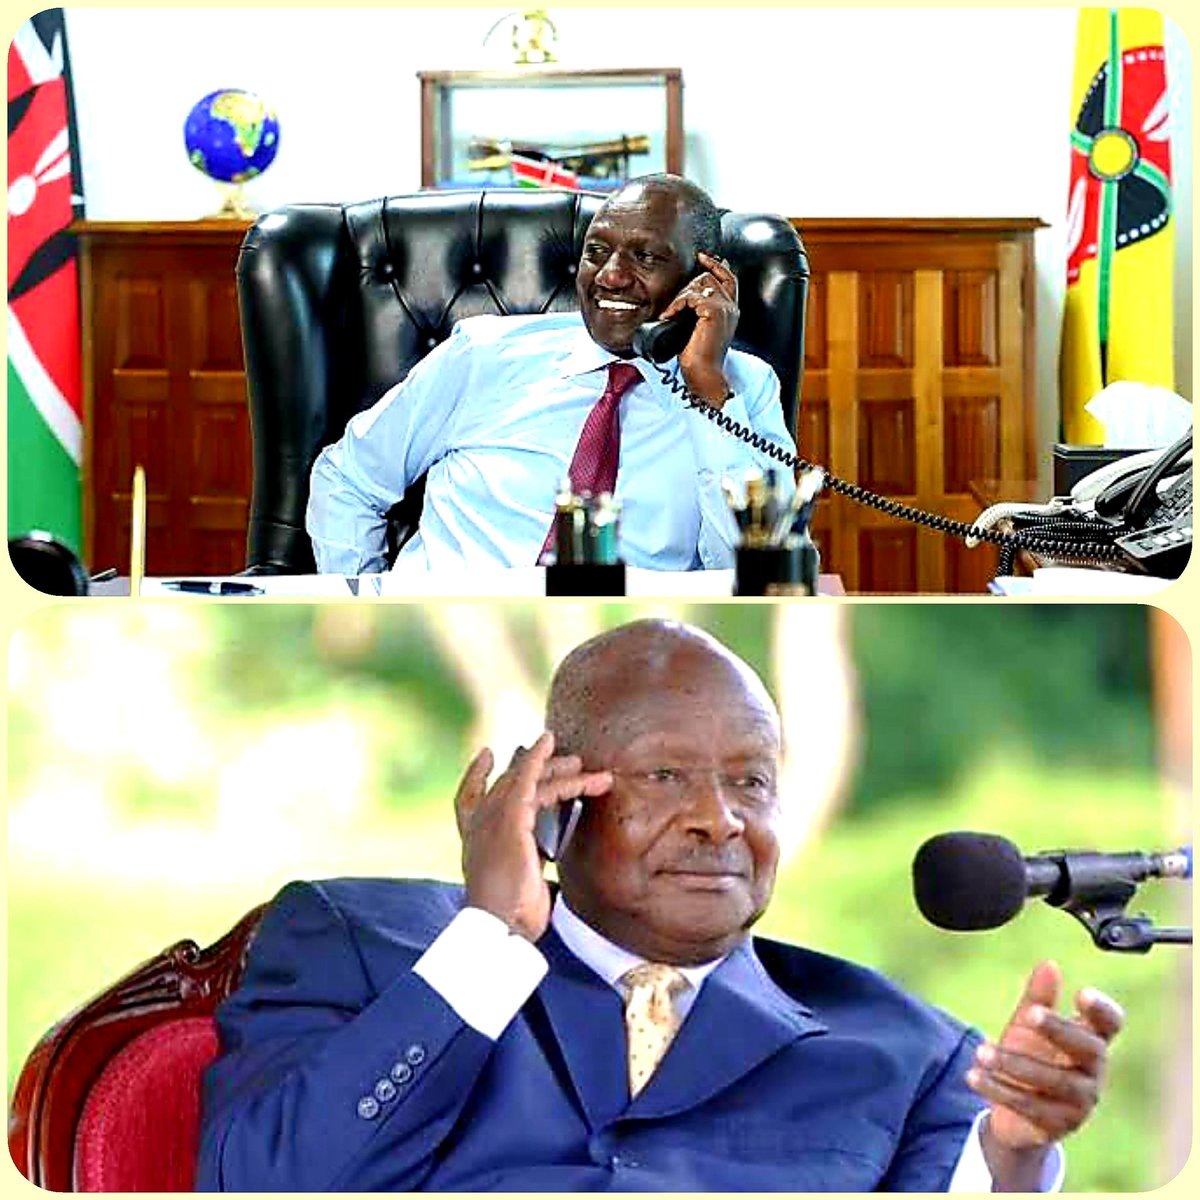 🦅Yesterday President Museveni received a telephone call from his counterpart, president Ruto of KENYA! The conversation was purely  Panafrican!

●Pres. RUTO: 'Allô Mr. president, uko salama?'

●Pres. MUSEVENI: 'Allô, I was talking to bazukuru here in Mbarara. How can I help